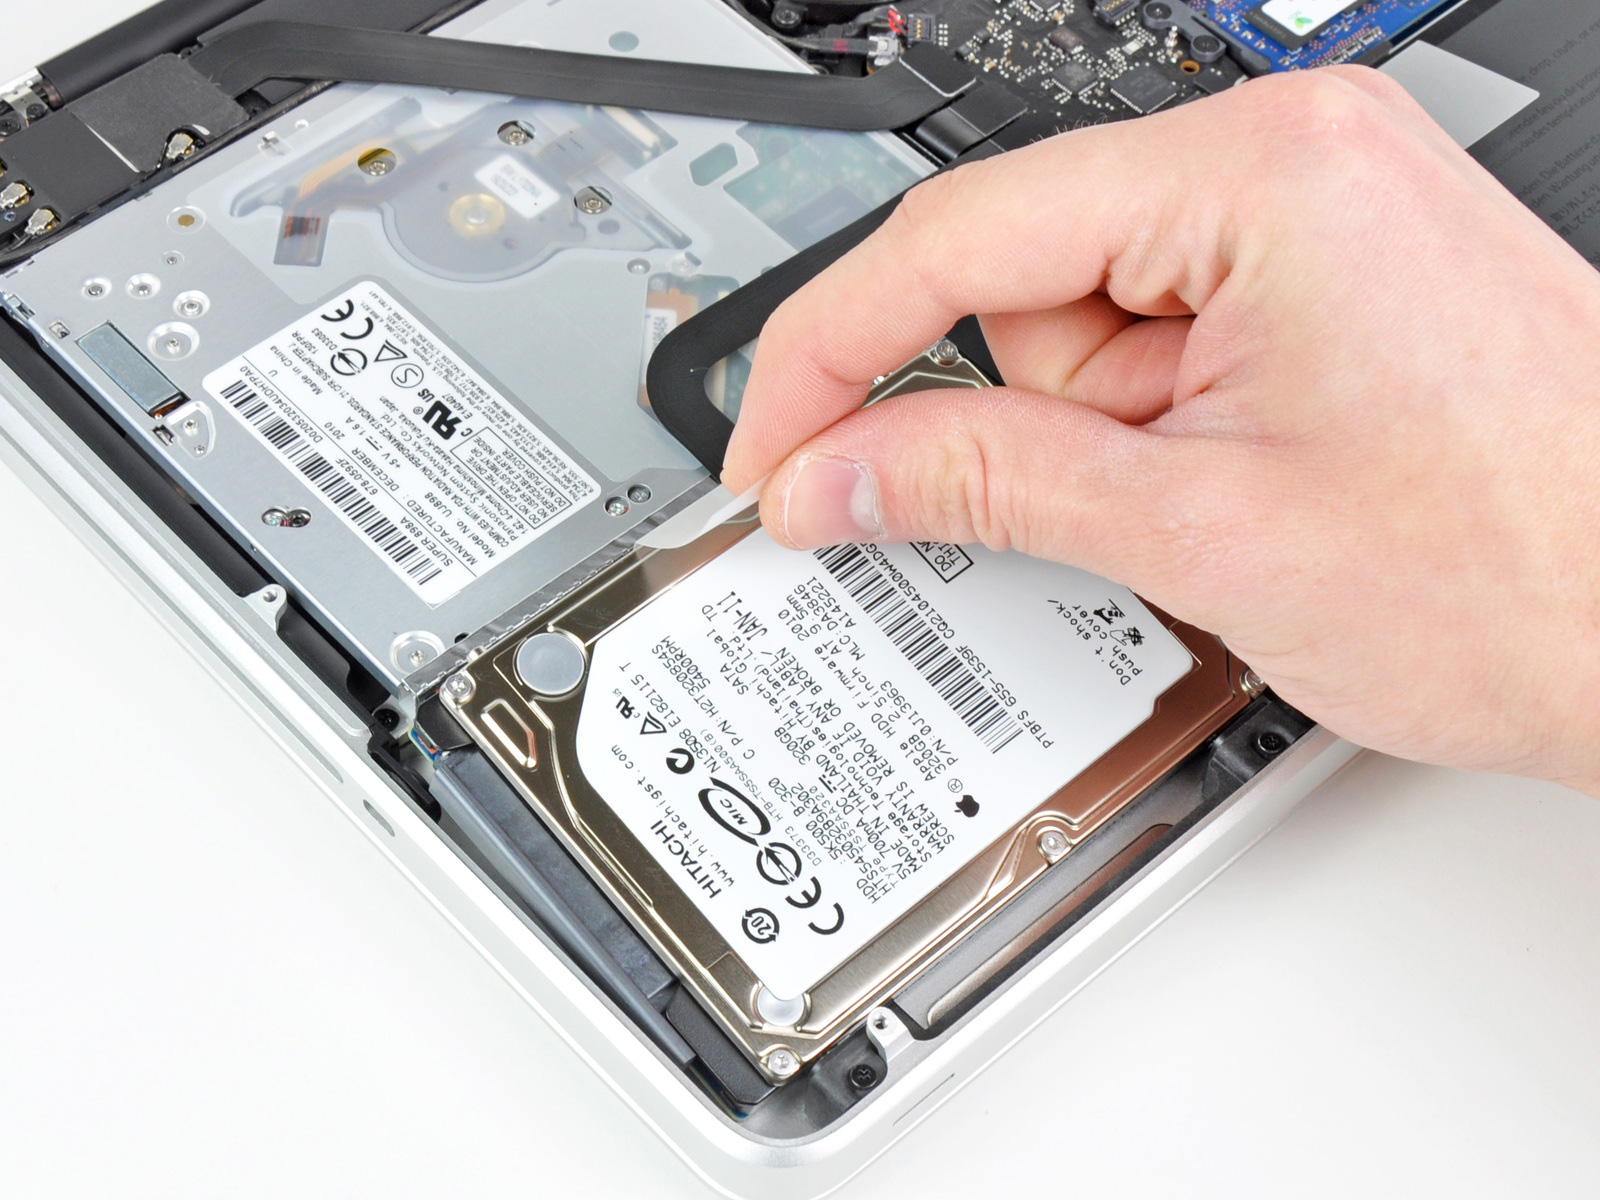 set up a new hard drive for mac pro 2010?